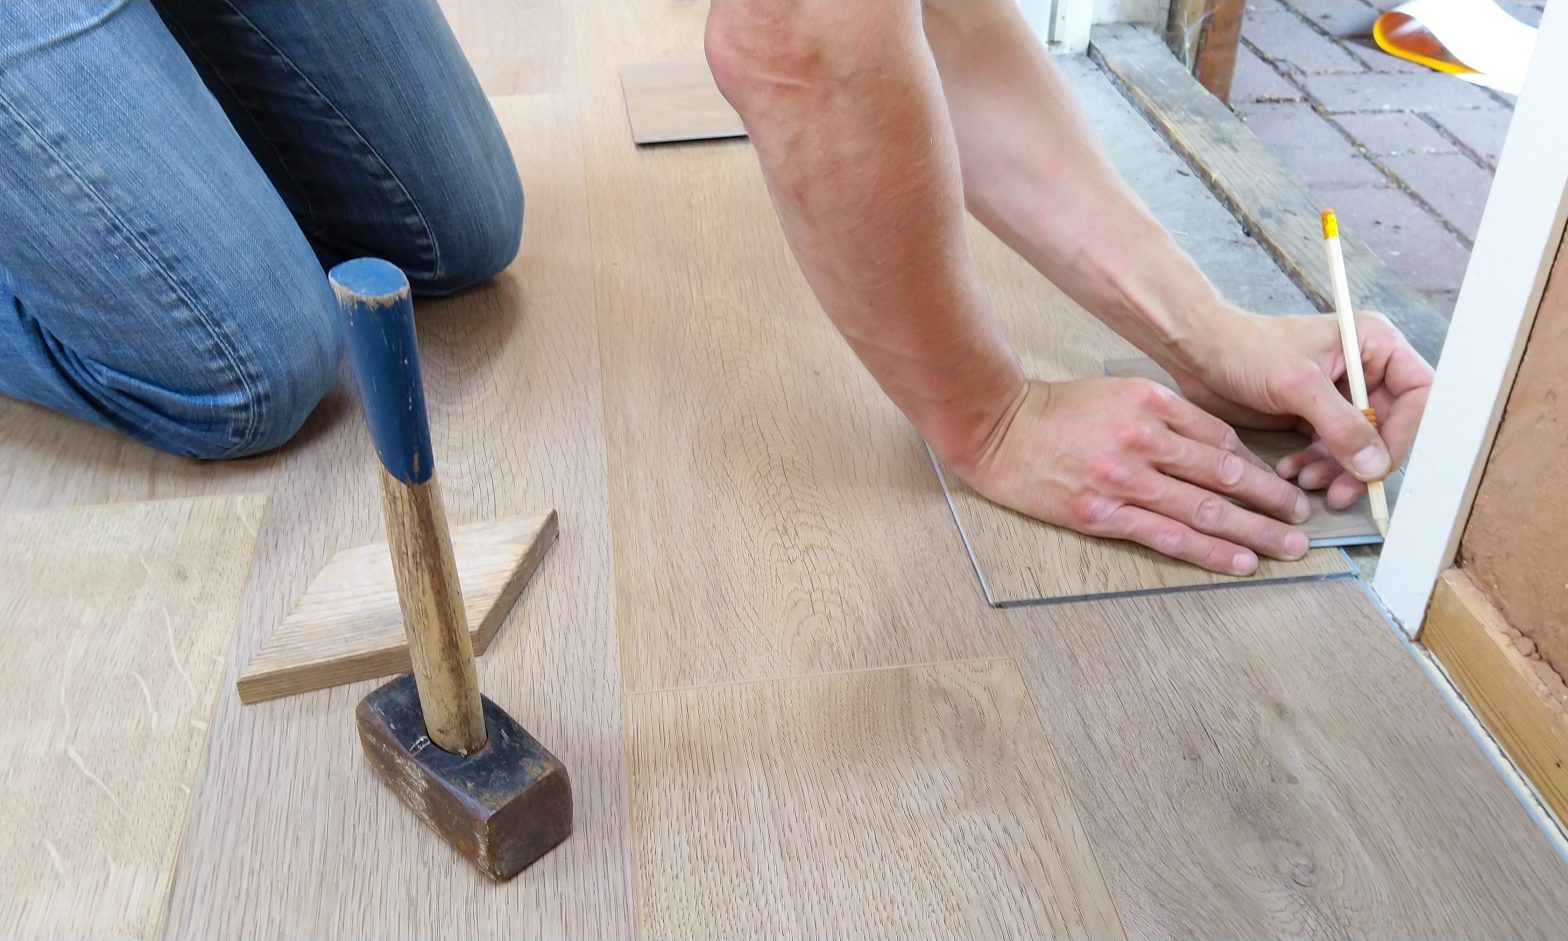 Enduring Collections - Laying Flooring